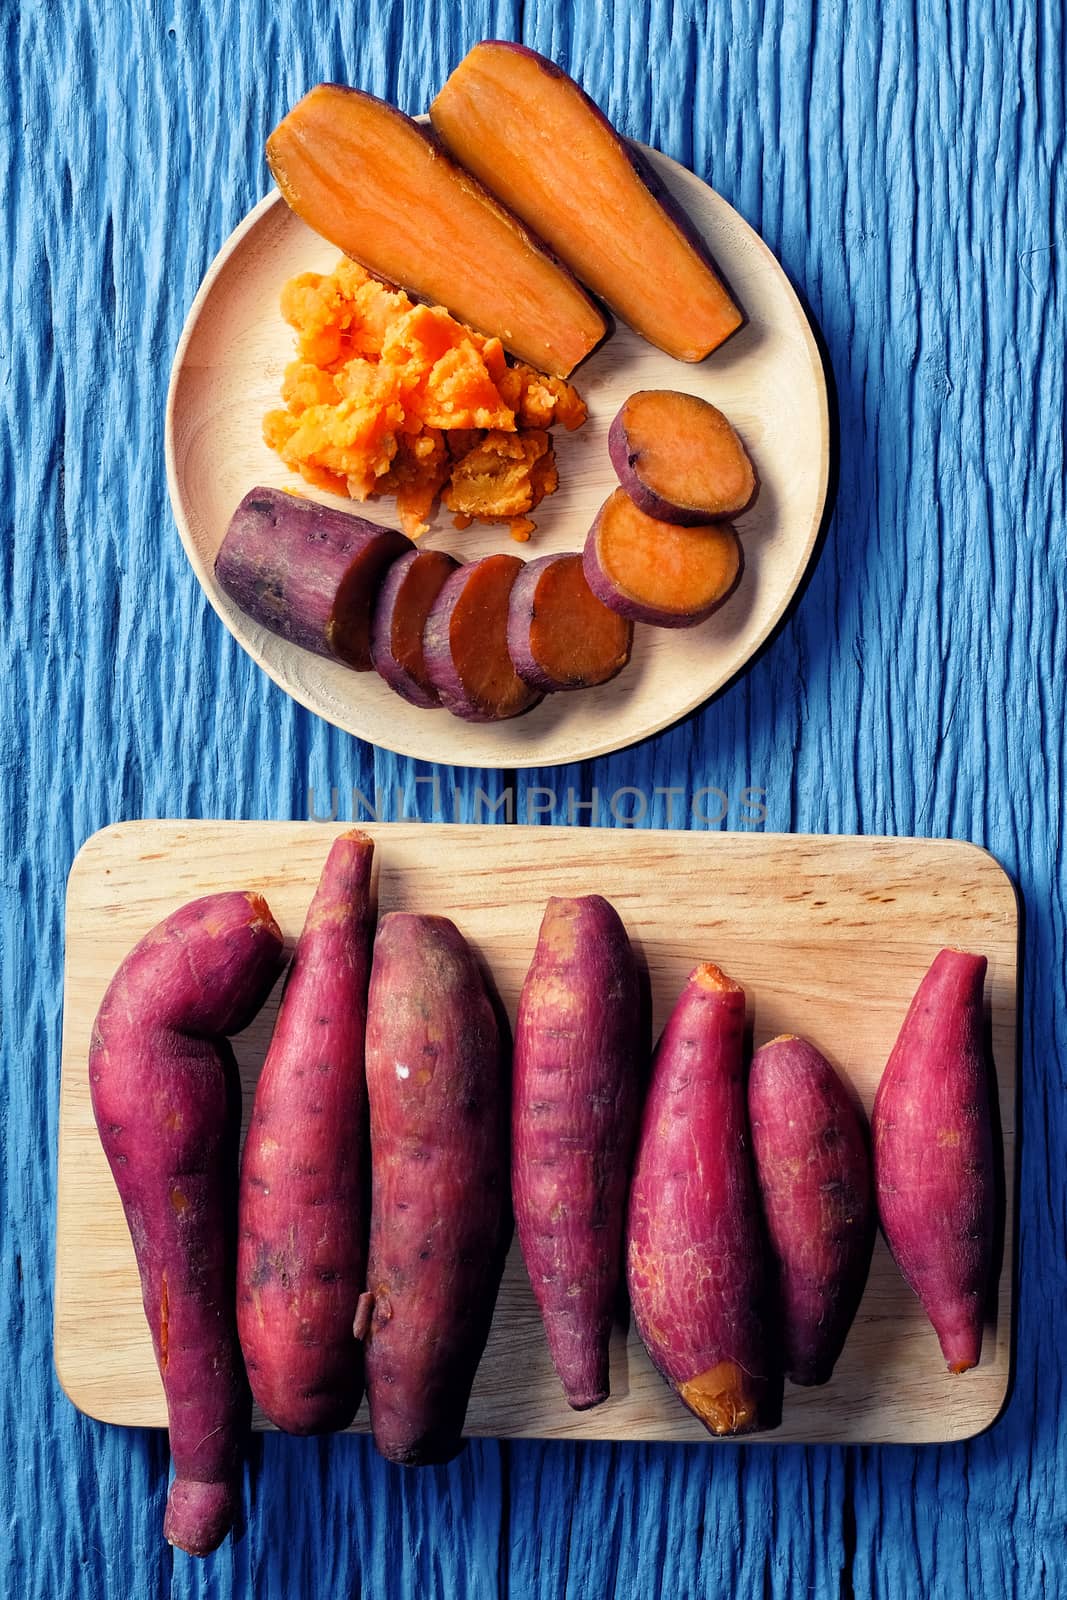 Sweet Potato on wooden cutting broad with blue wood background by Surasak